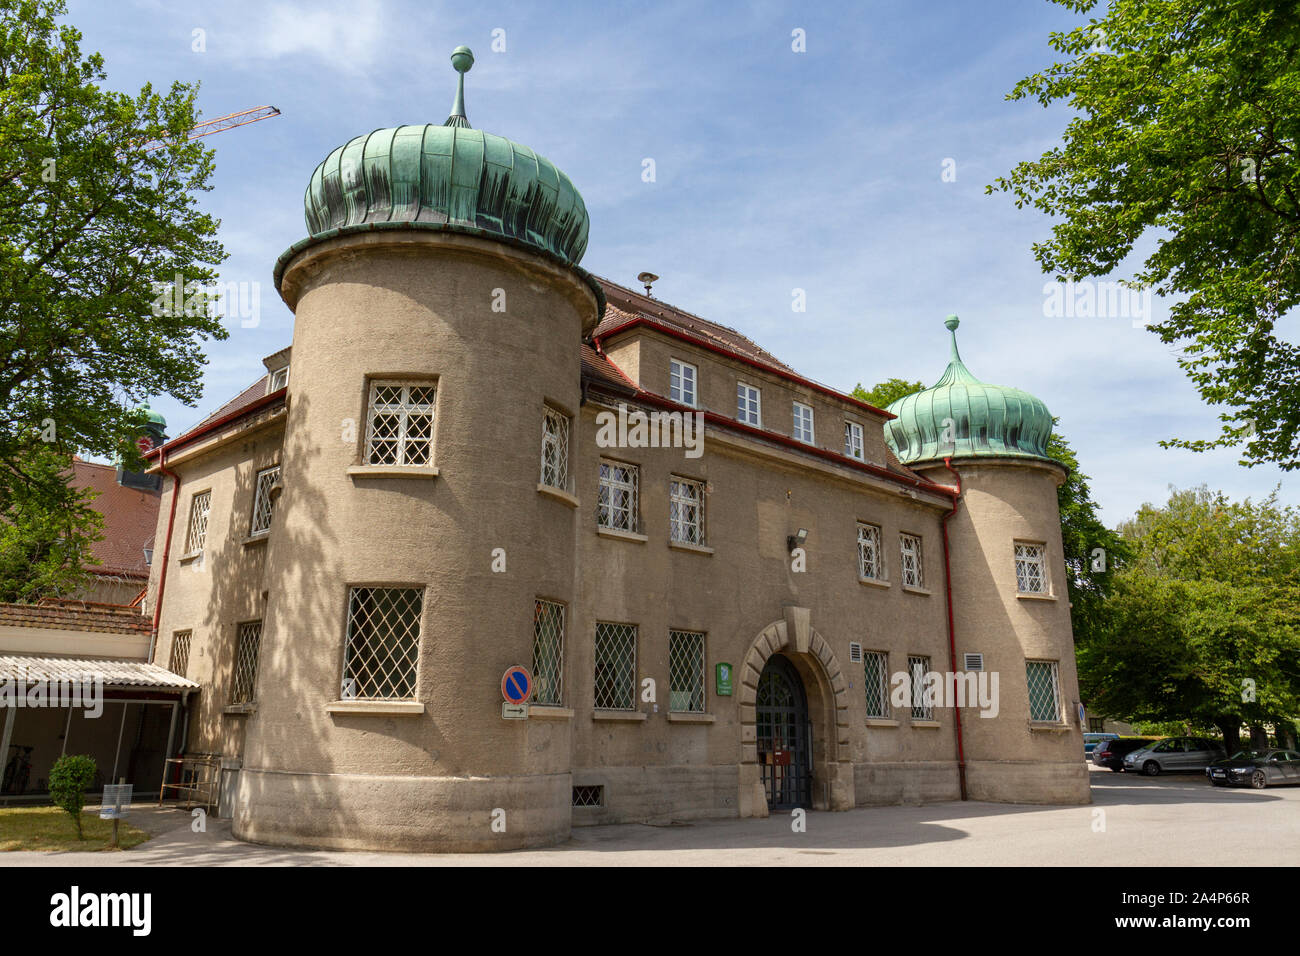 Main entrance to Landsberg Prison where Adolf Hitler dictated his memoirs Mein Kampf to Rudolf Hess in 1923, Landsberg am Lech, Bavaria, Germany. Stock Photo